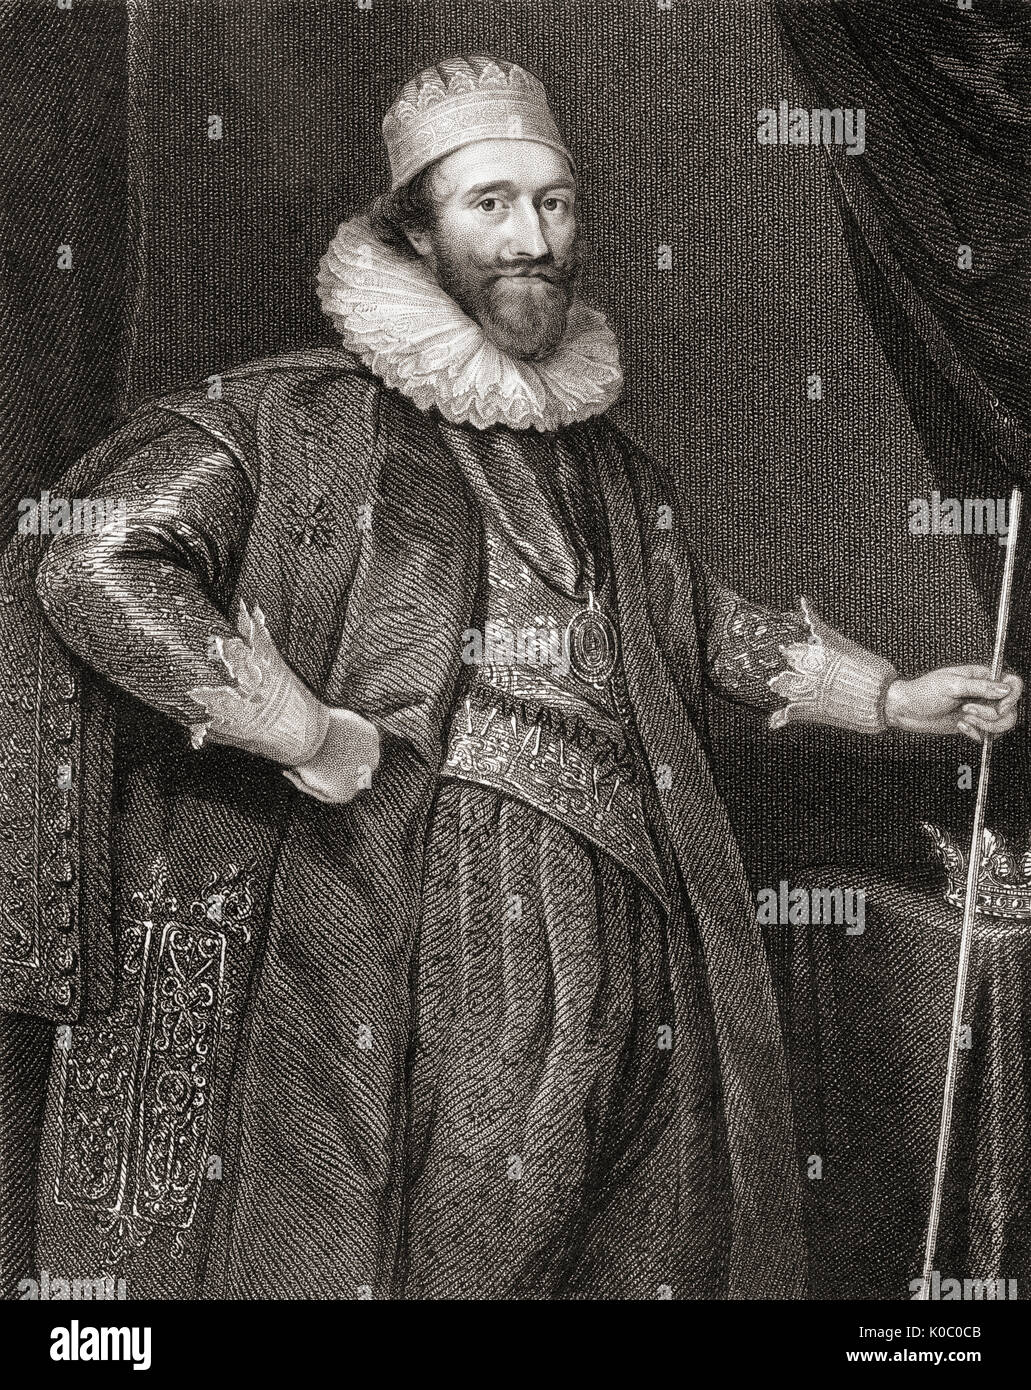 Ludovic Stewart, 2nd Duke of Lennox and 1st Duke of Richmond, 1574 – 1624. Scottish nobleman and politician.  From the book “Lodge’s British Portraits” published London 1823. Stock Photo